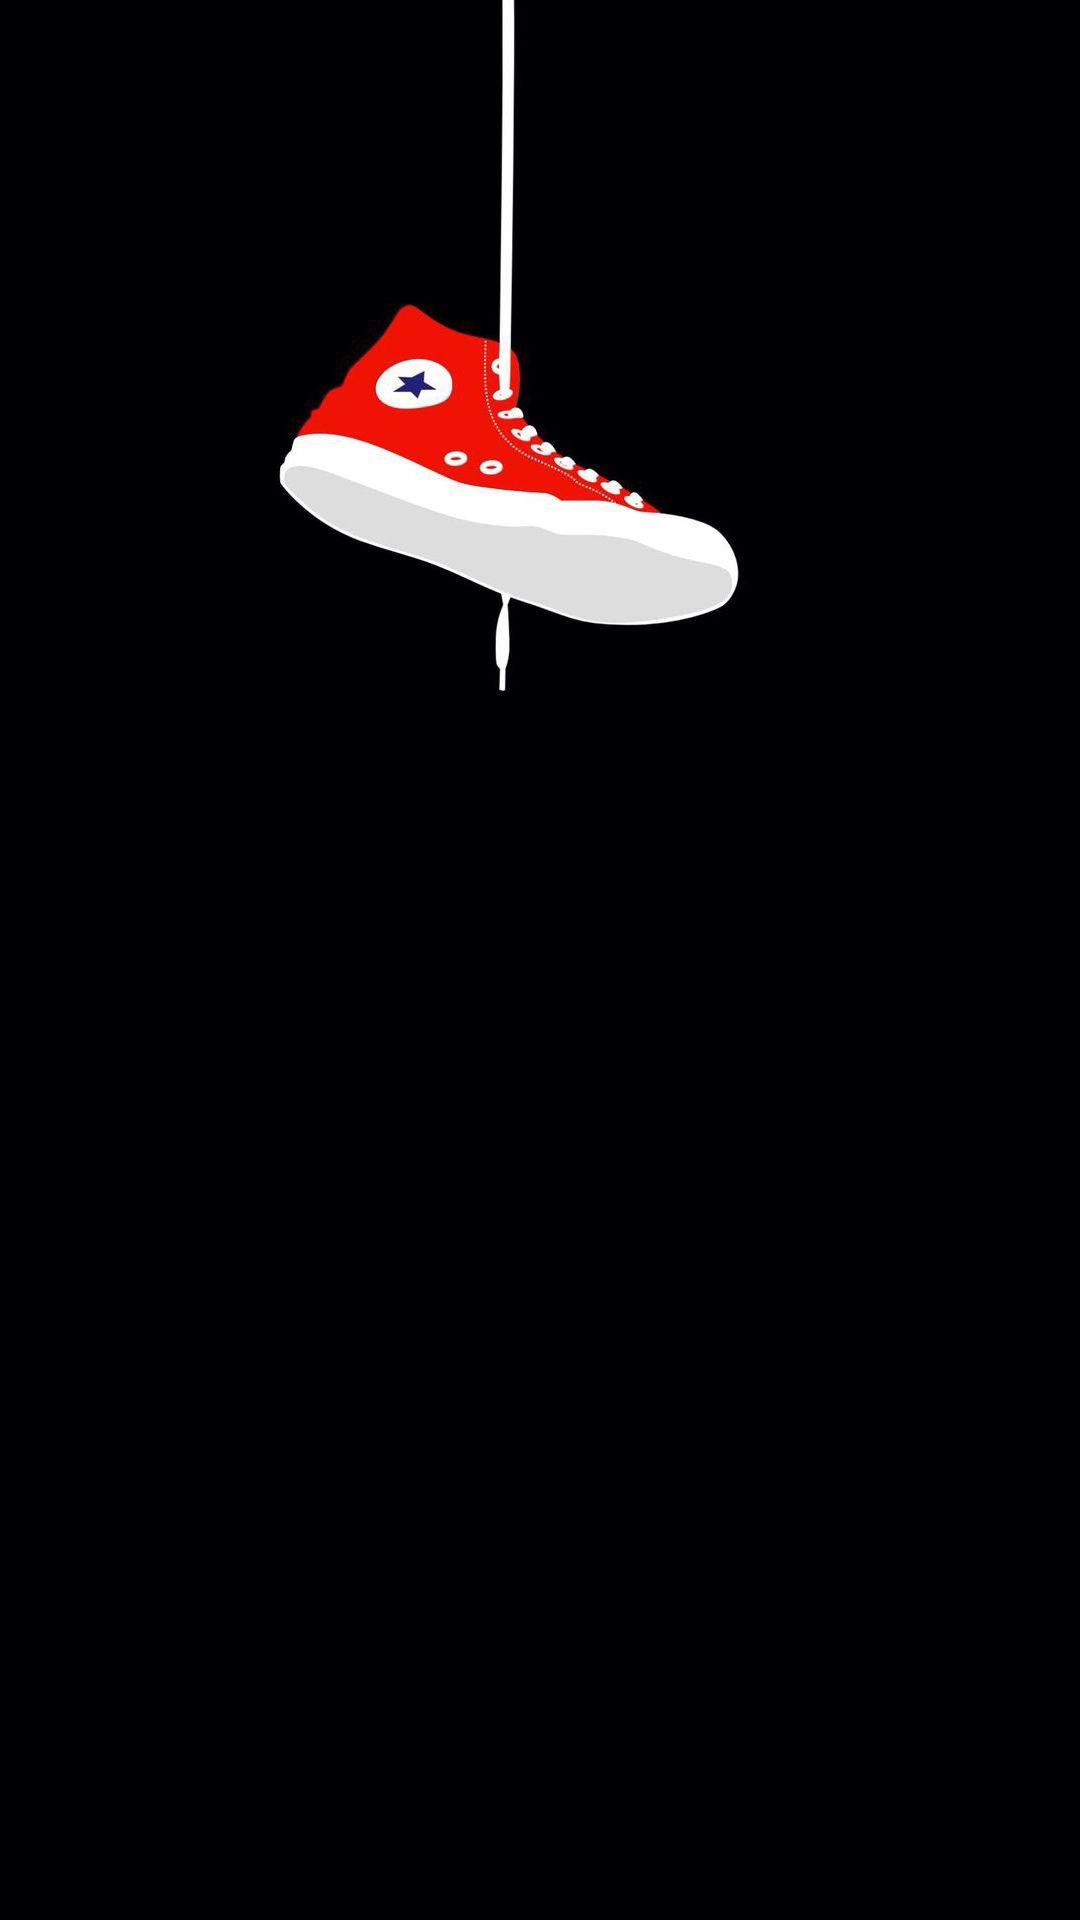 Converse high. I stan 7 members in one group. iPhone wallpaper